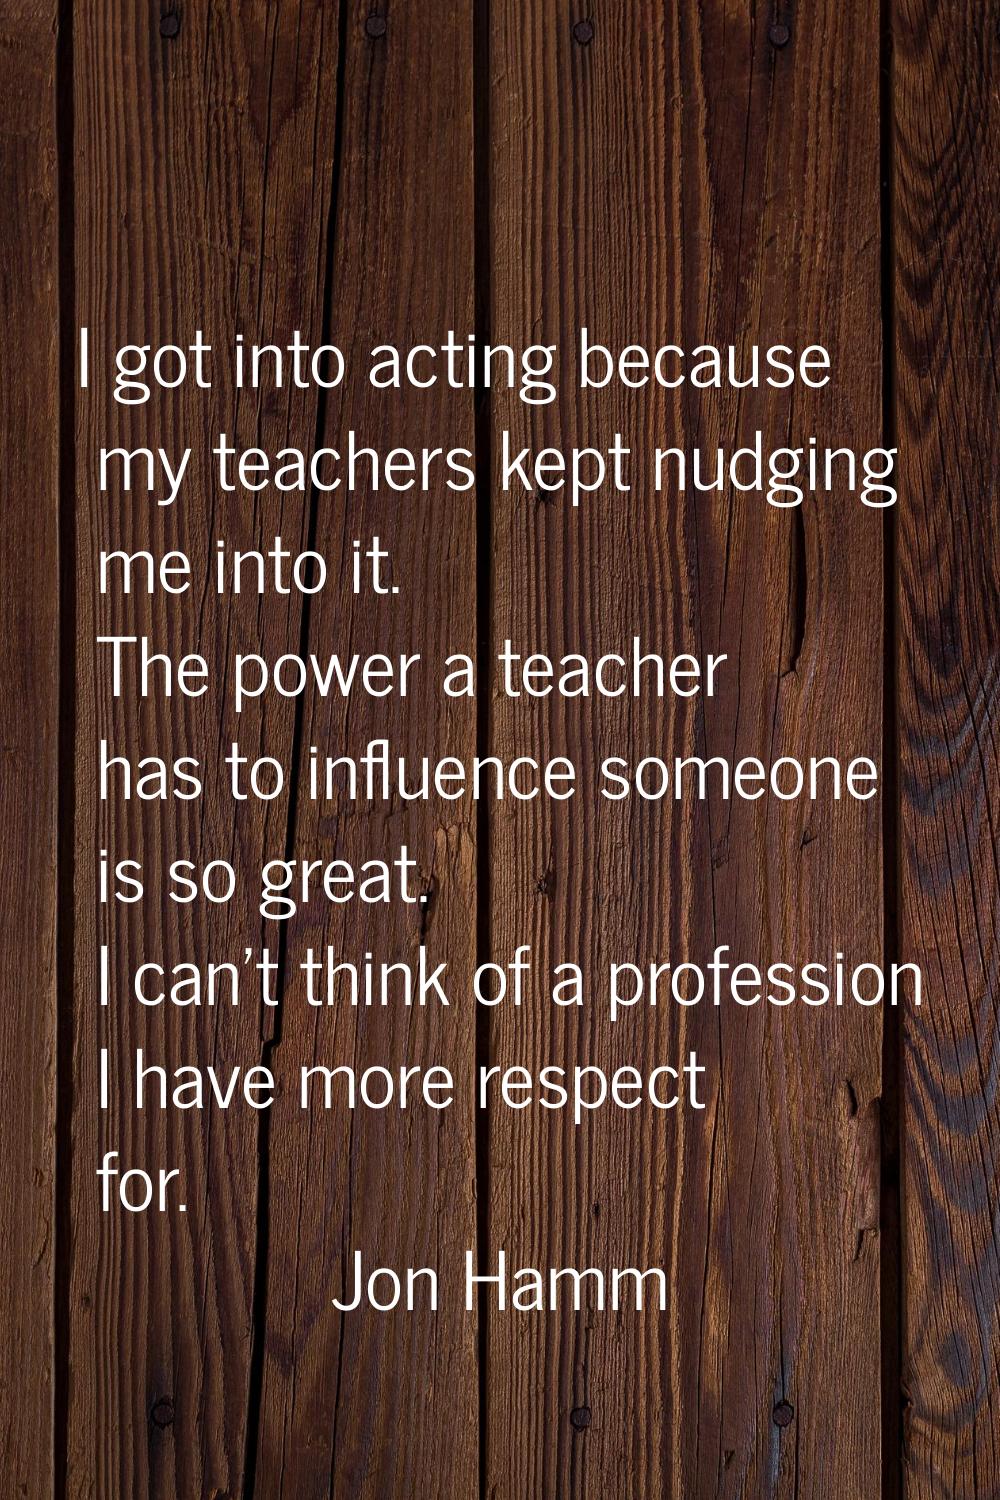 I got into acting because my teachers kept nudging me into it. The power a teacher has to influence